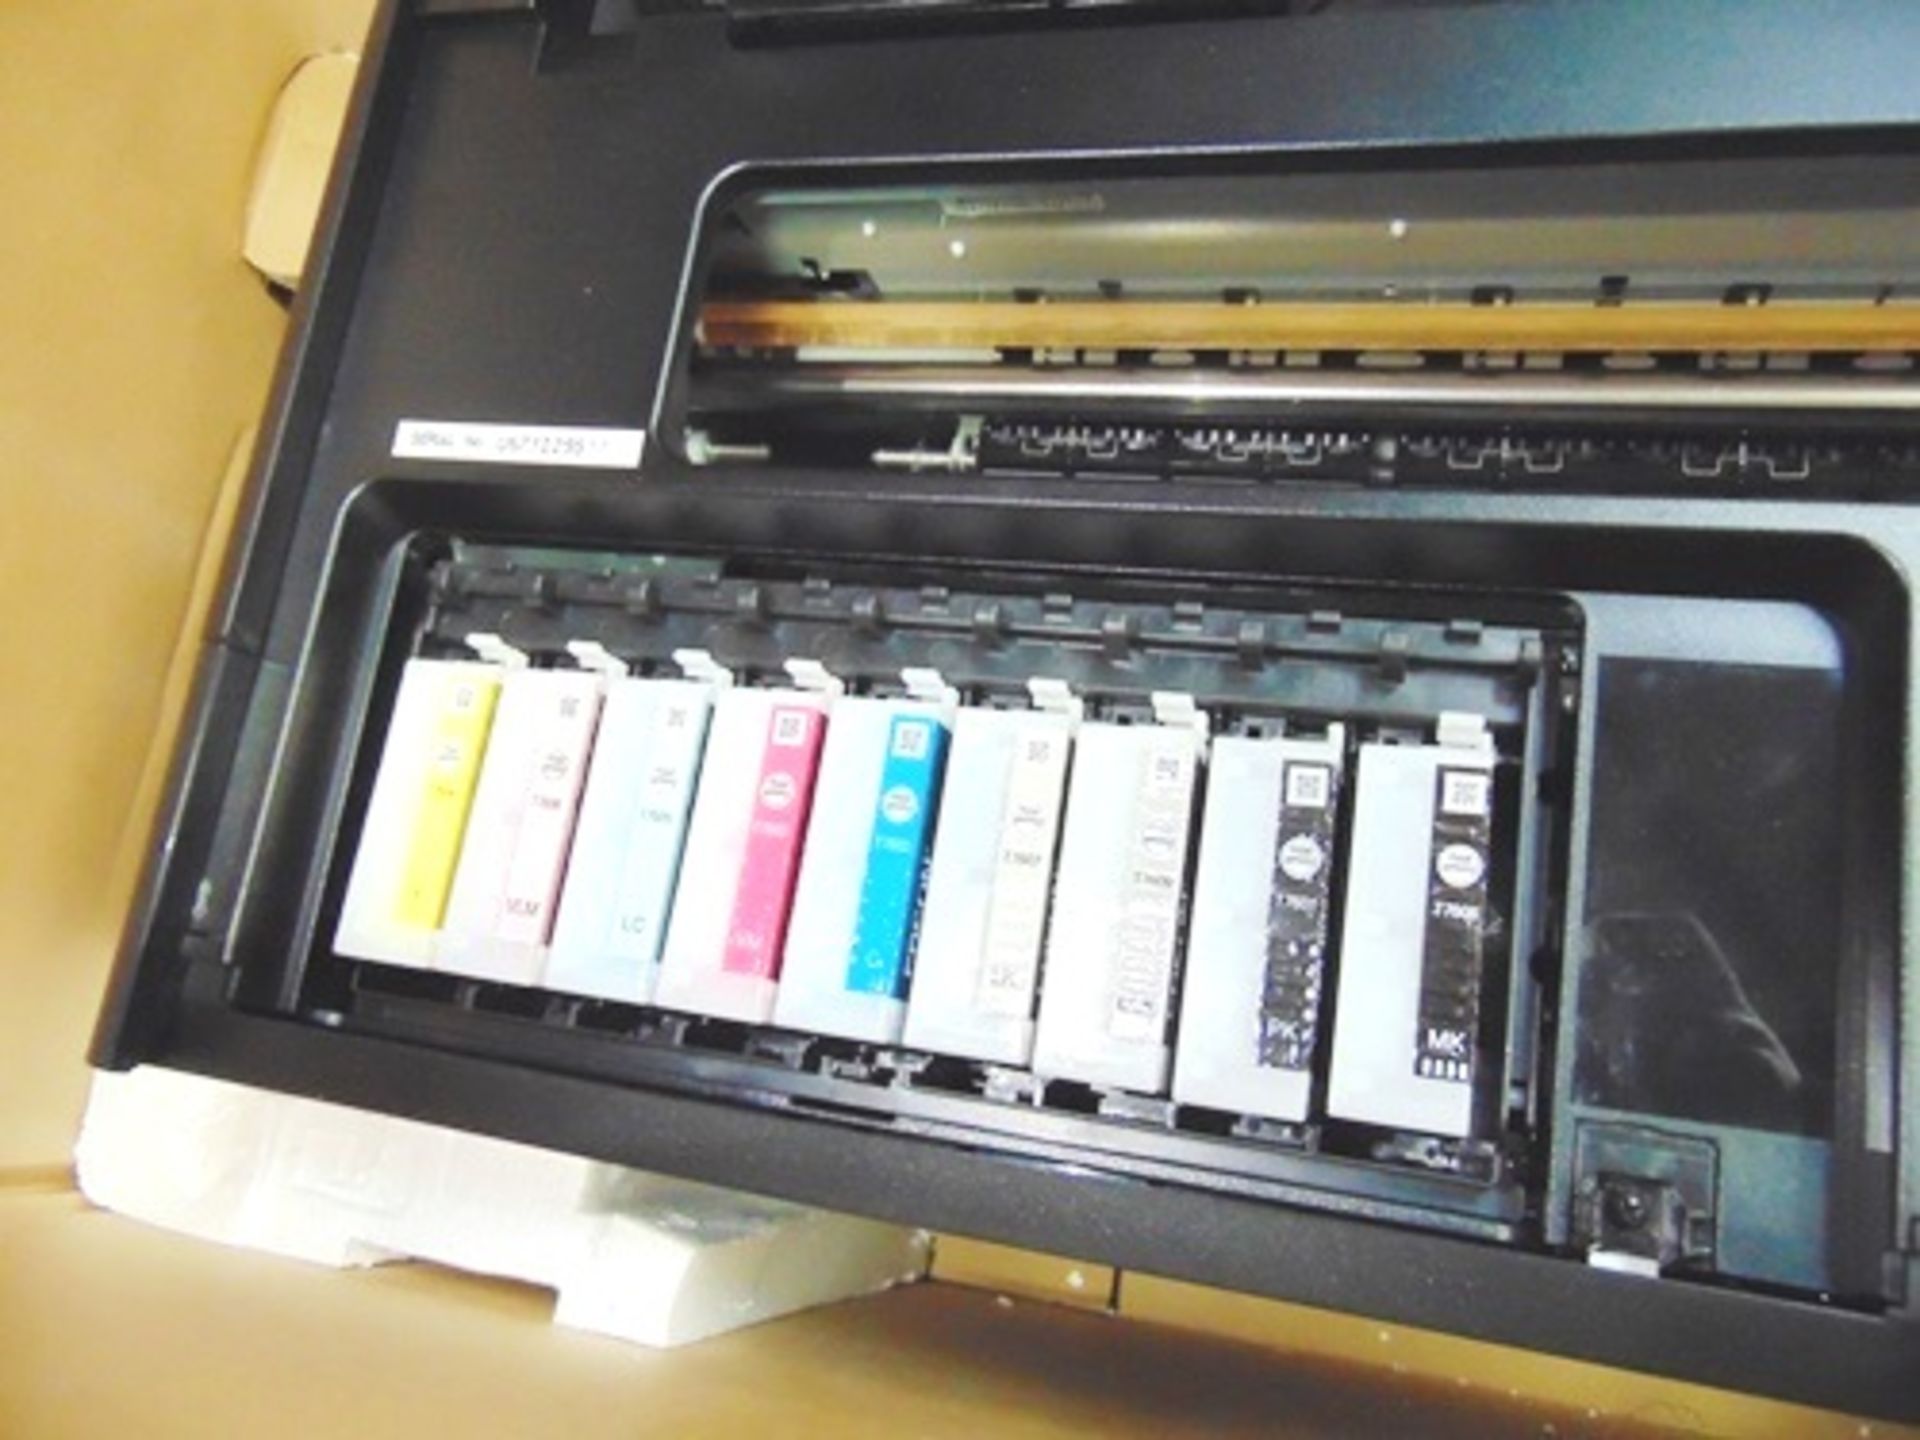 Epson Sure-Colour SC-P600 photo printer, model B471A - Second-hand, untested, unchecked(ES4) - Image 6 of 7